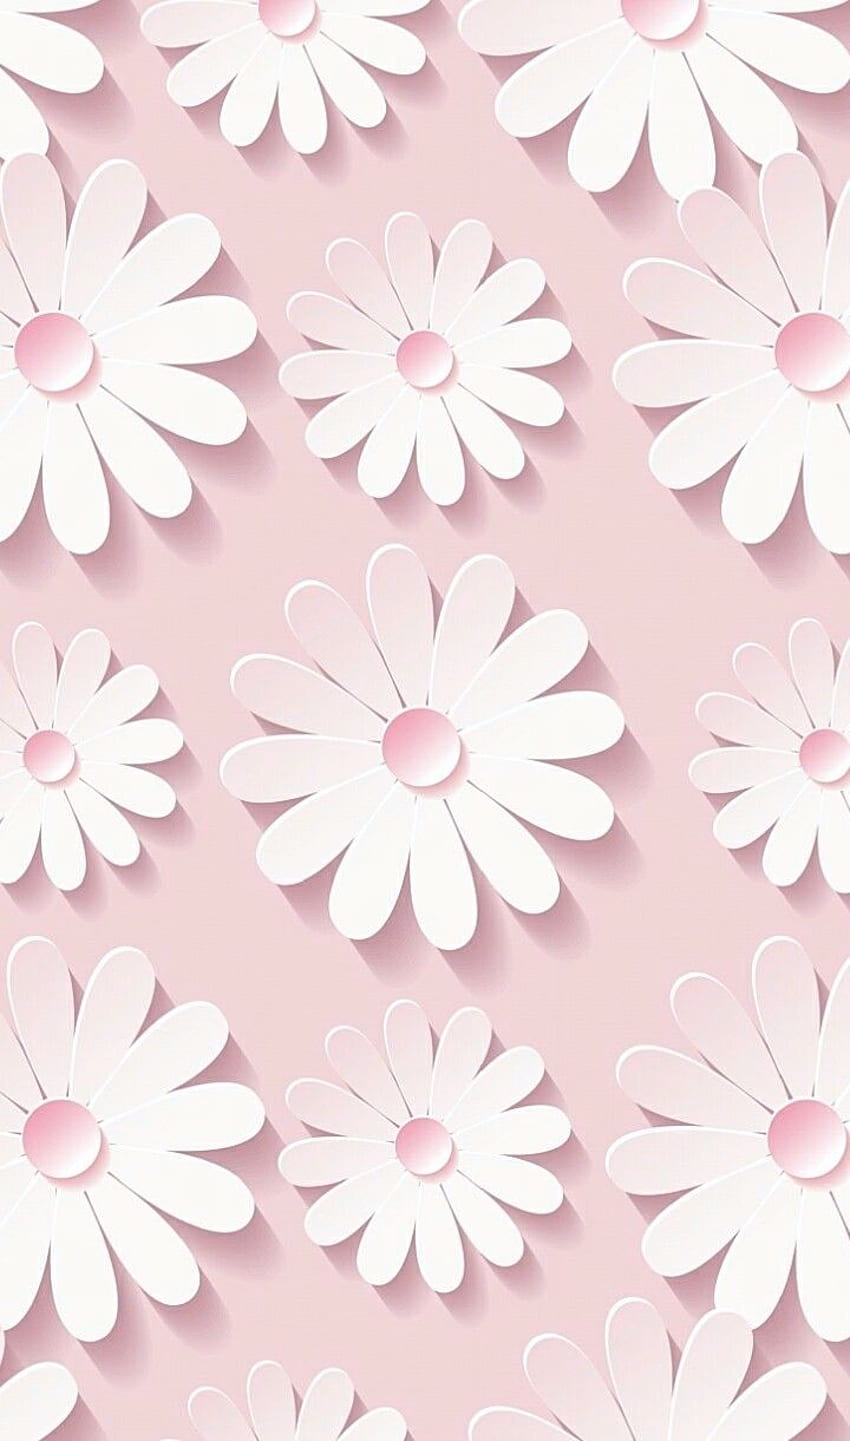 art, background, beautiful, beauty, cartoon, colorful, design, drawing, fashion, fashionable, flowers, girly, illustration, inspiration, leaves, luxury, pastel, pattern, patterns, pink, pink flowers, pretty, texture, vintage, , we heart it, whi HD phone wallpaper